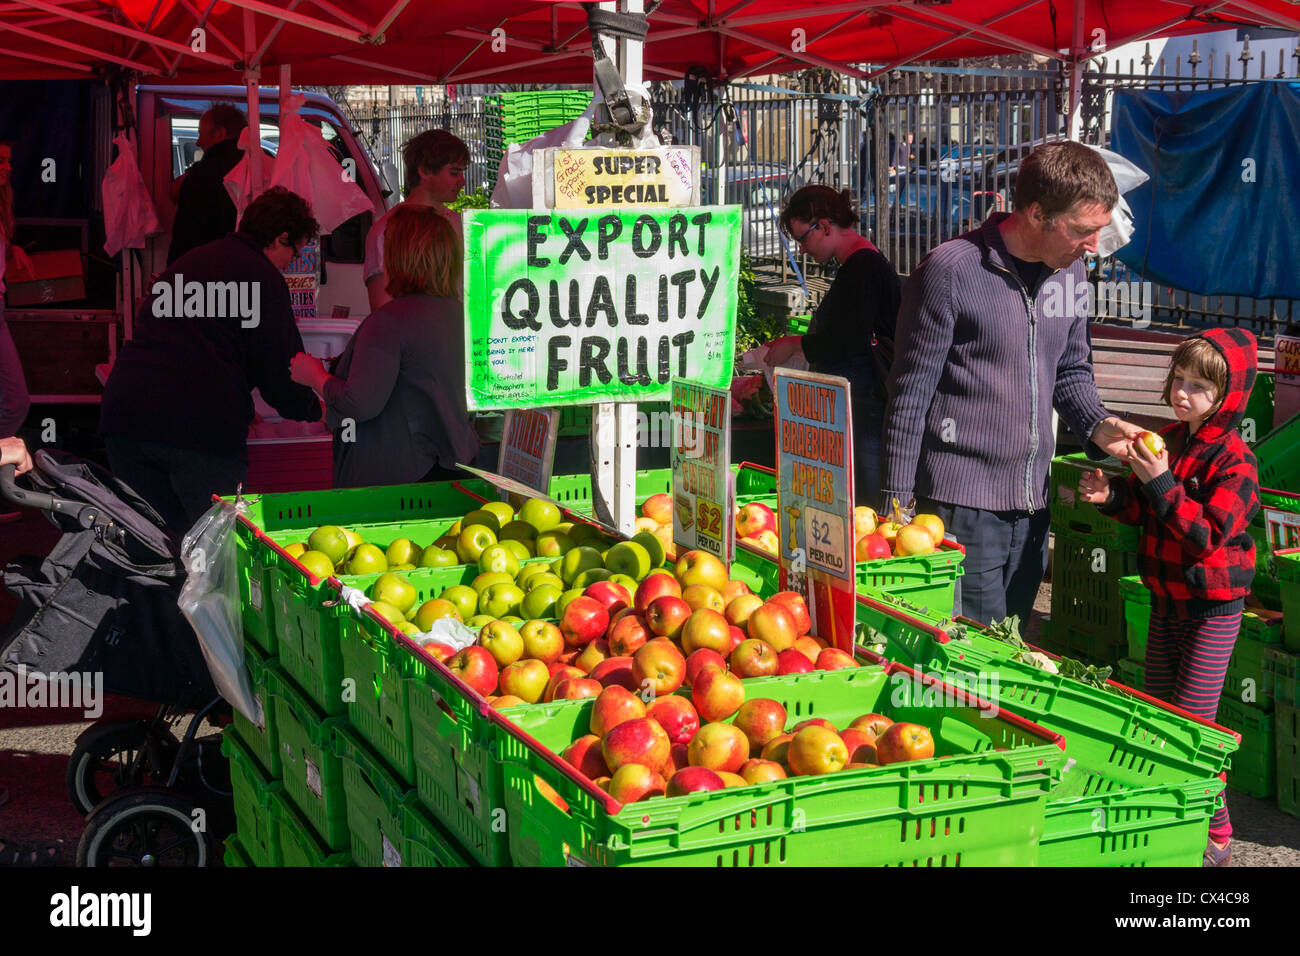 Export quality fruit for sale at a farmer's market in Dunedin, Otago, New Zealand. Stock Photo